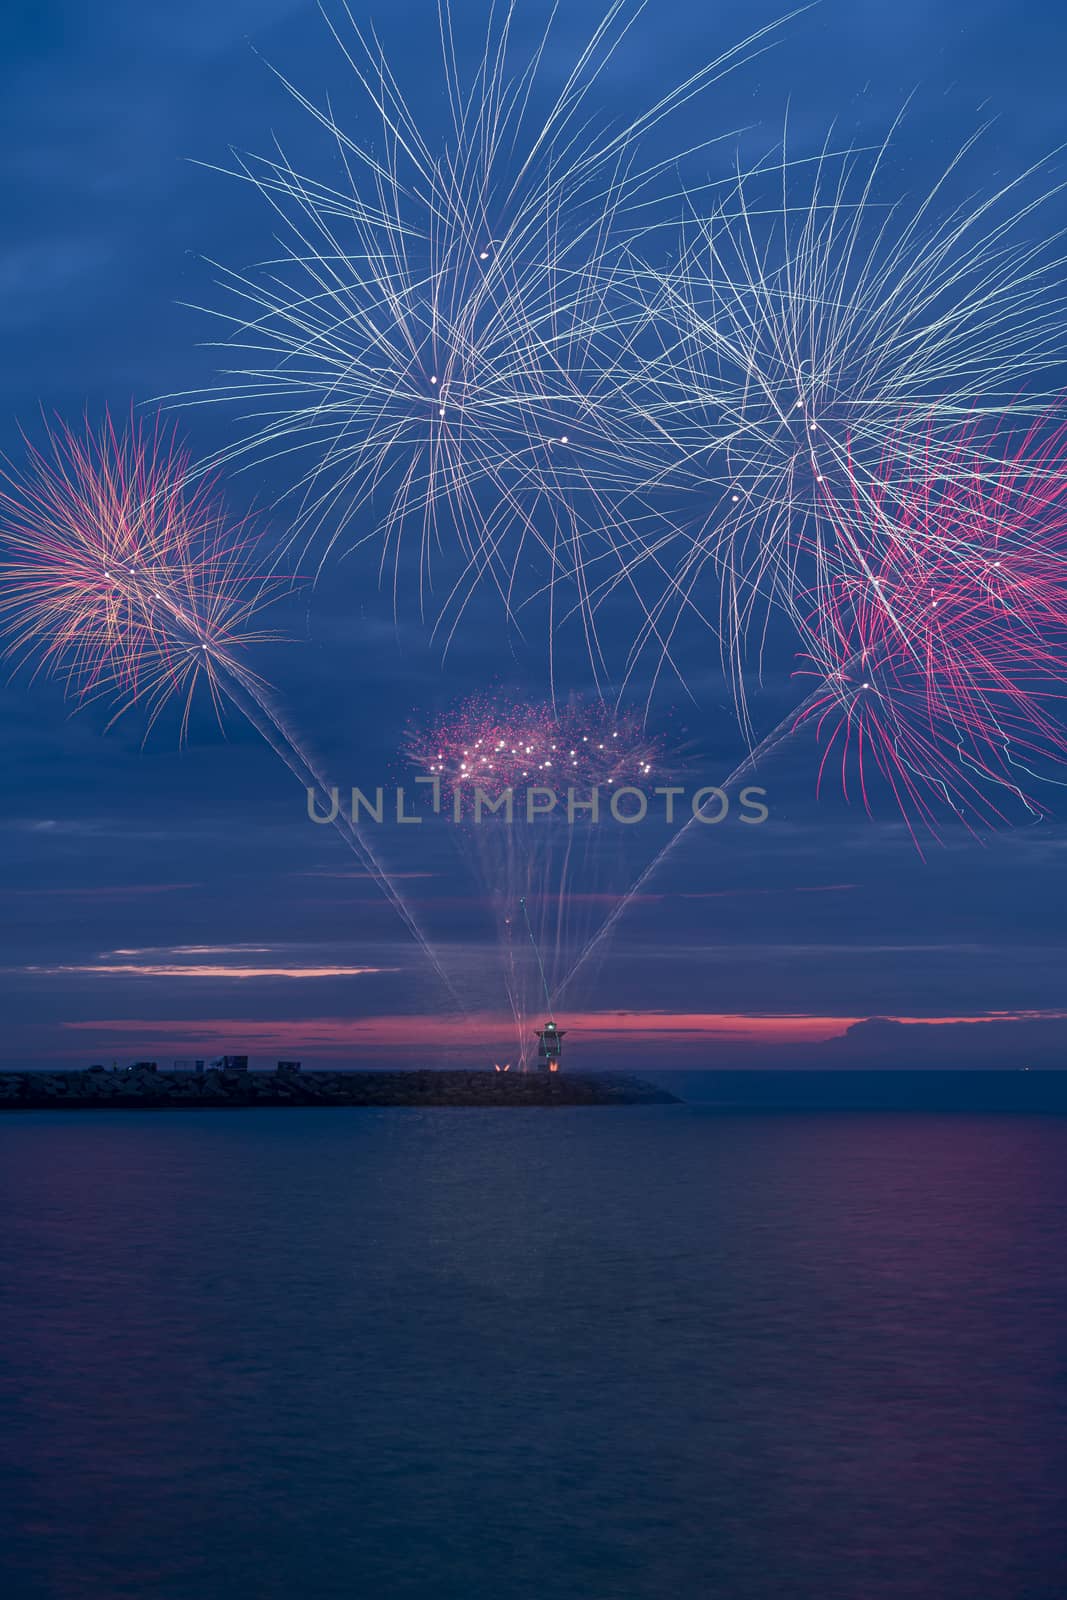 Fireworks launch at the pier of the Scheveningen harbor celebrating the Tall Ship Regatta in The Hague, Netherlands